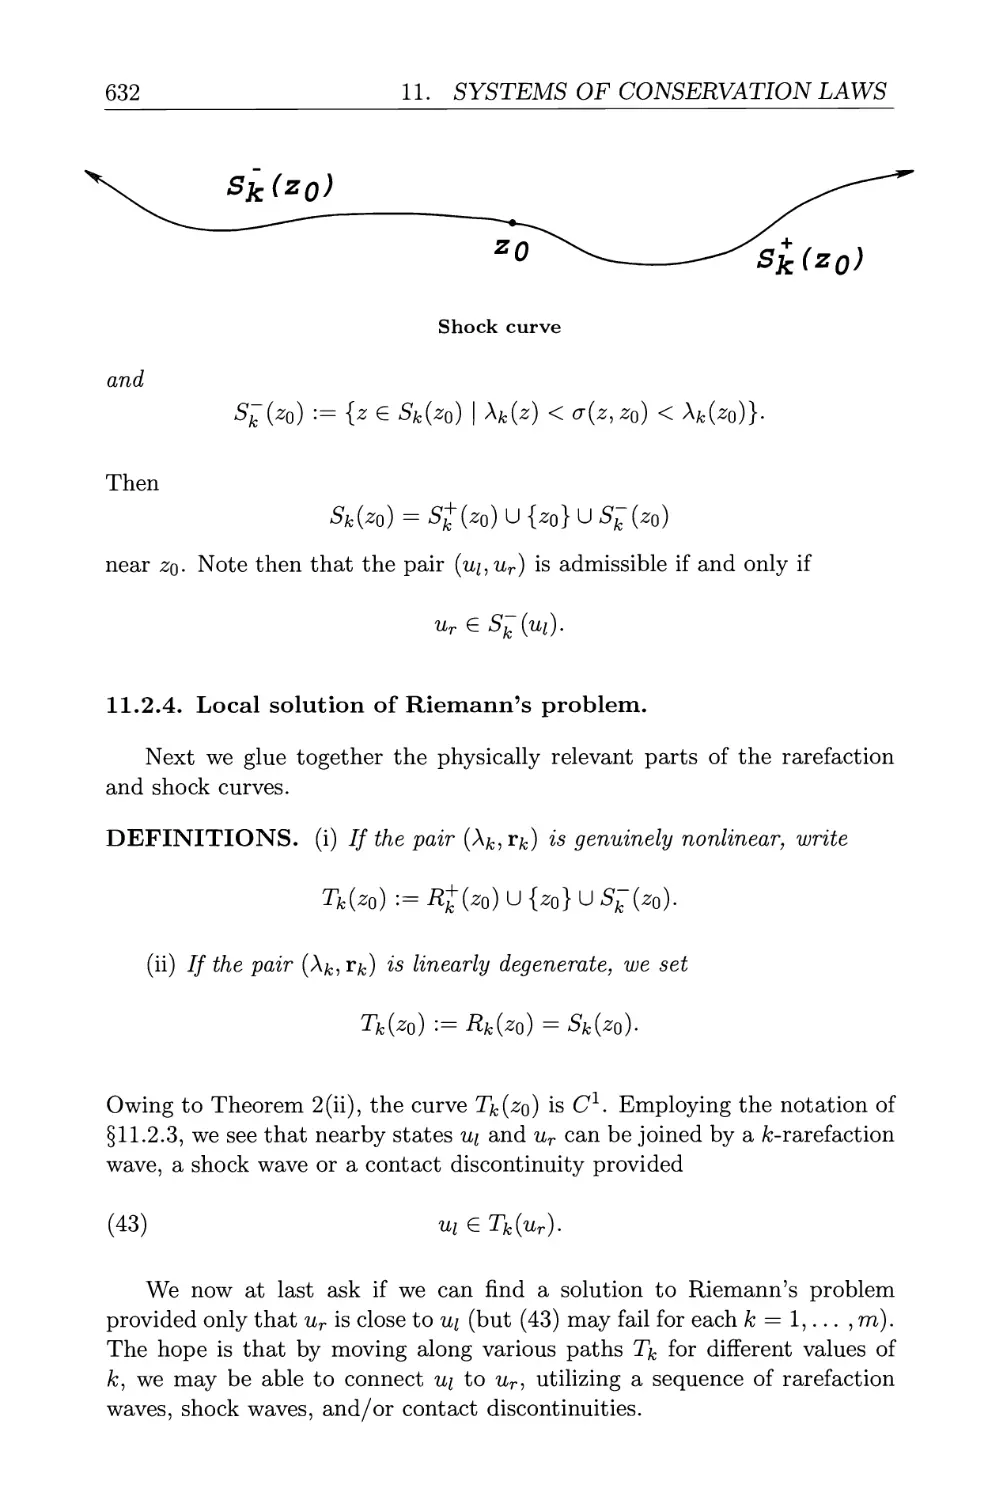 11.2.4. Local solution of Riemann's problem